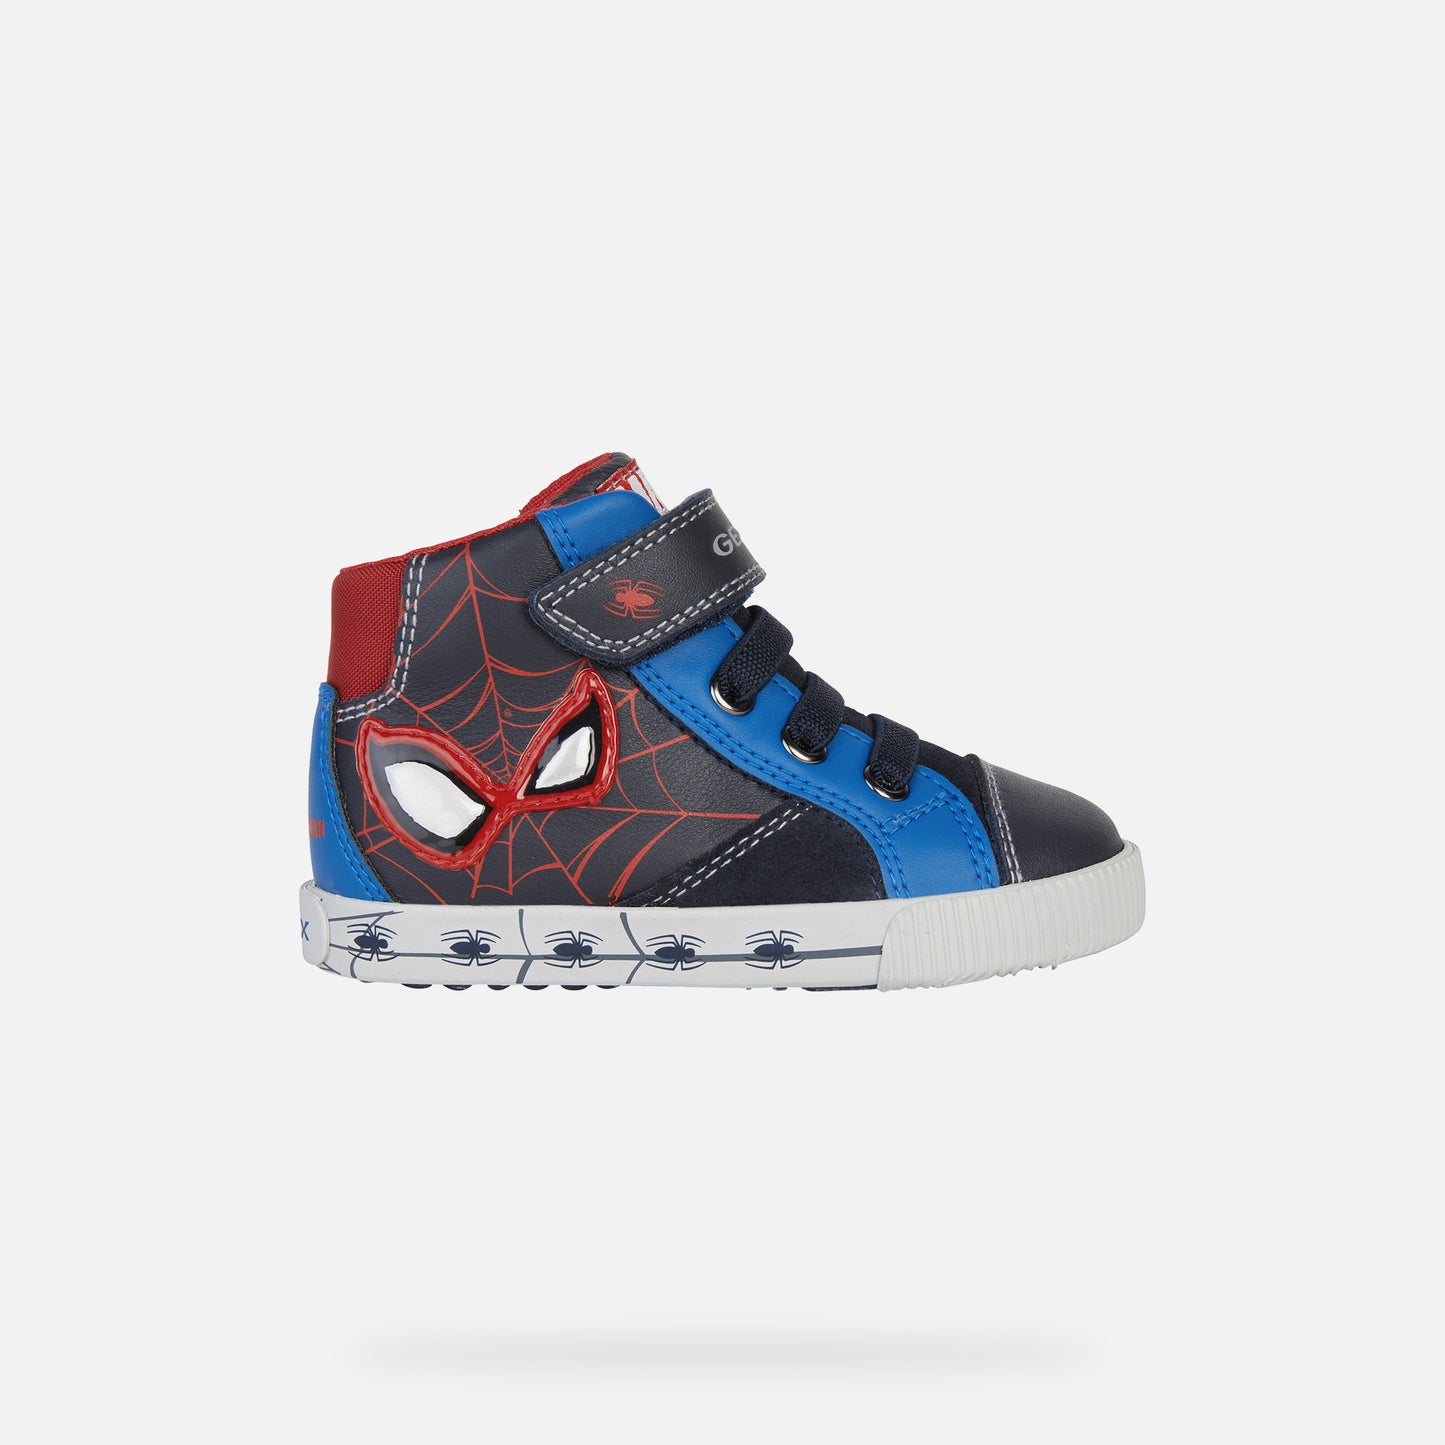 A boys Hi-Top Trainer by Geox, style B Kilwi Boy Spiderman, in navy and royal with red Spiderman detail, velcro and inside zip fastening. Right side view